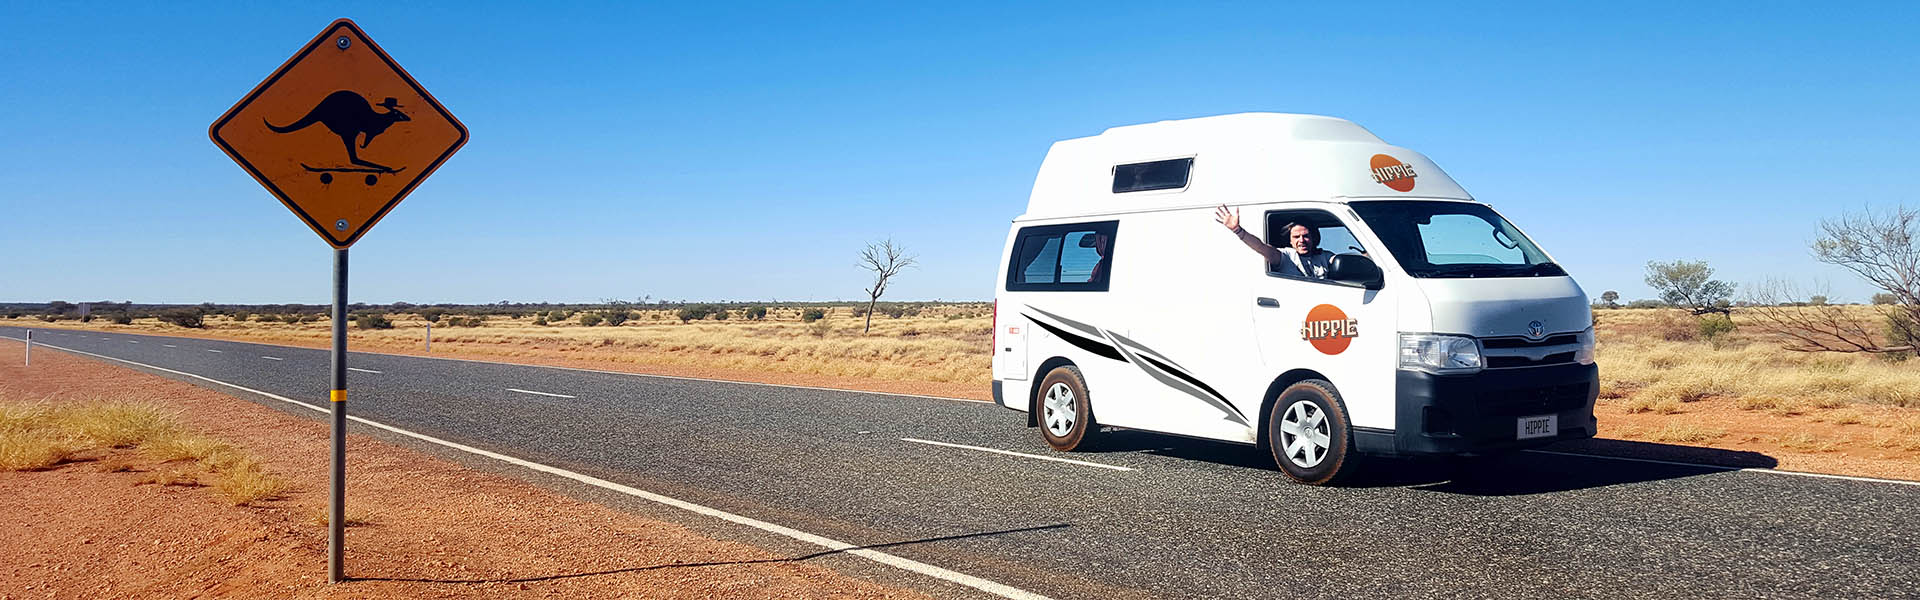 Hippie Hitop Camper on an Australian outback road trip